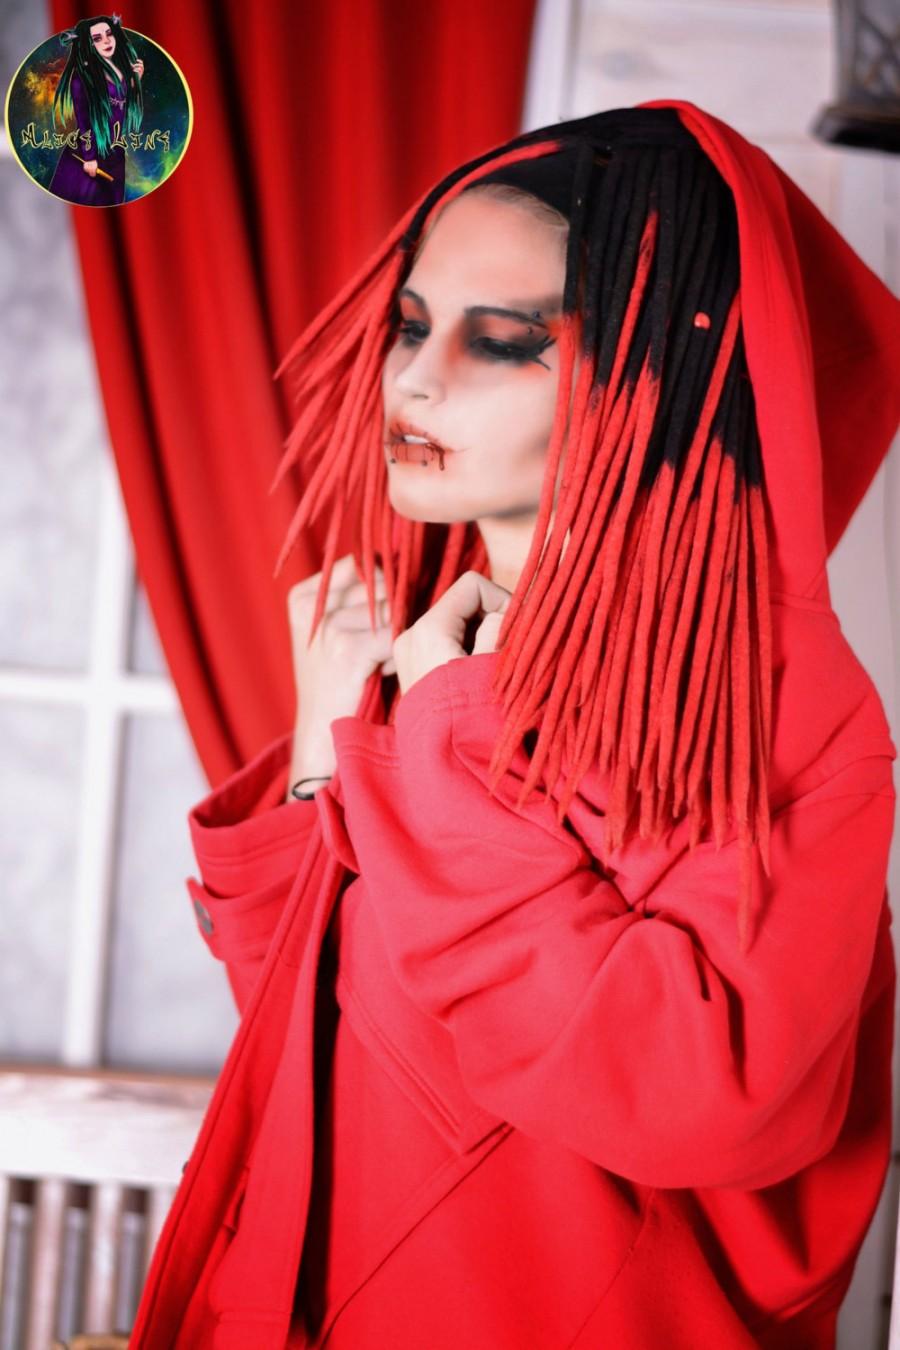 Mariage - Set of wool DE dreads " Bloody Red Riding Hood " red black double ended dreads merino full set dreadlocks extensions